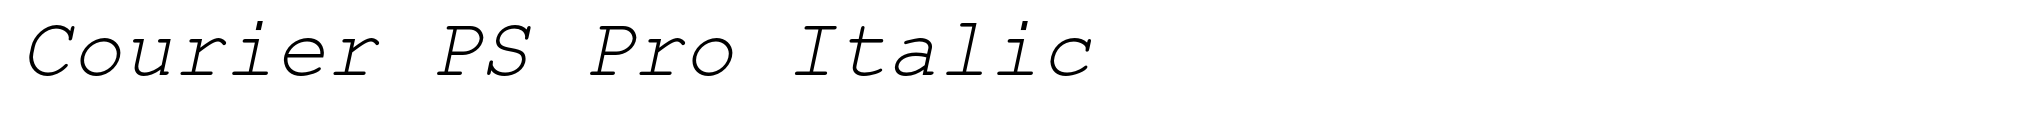 Courier PS Pro Italic image